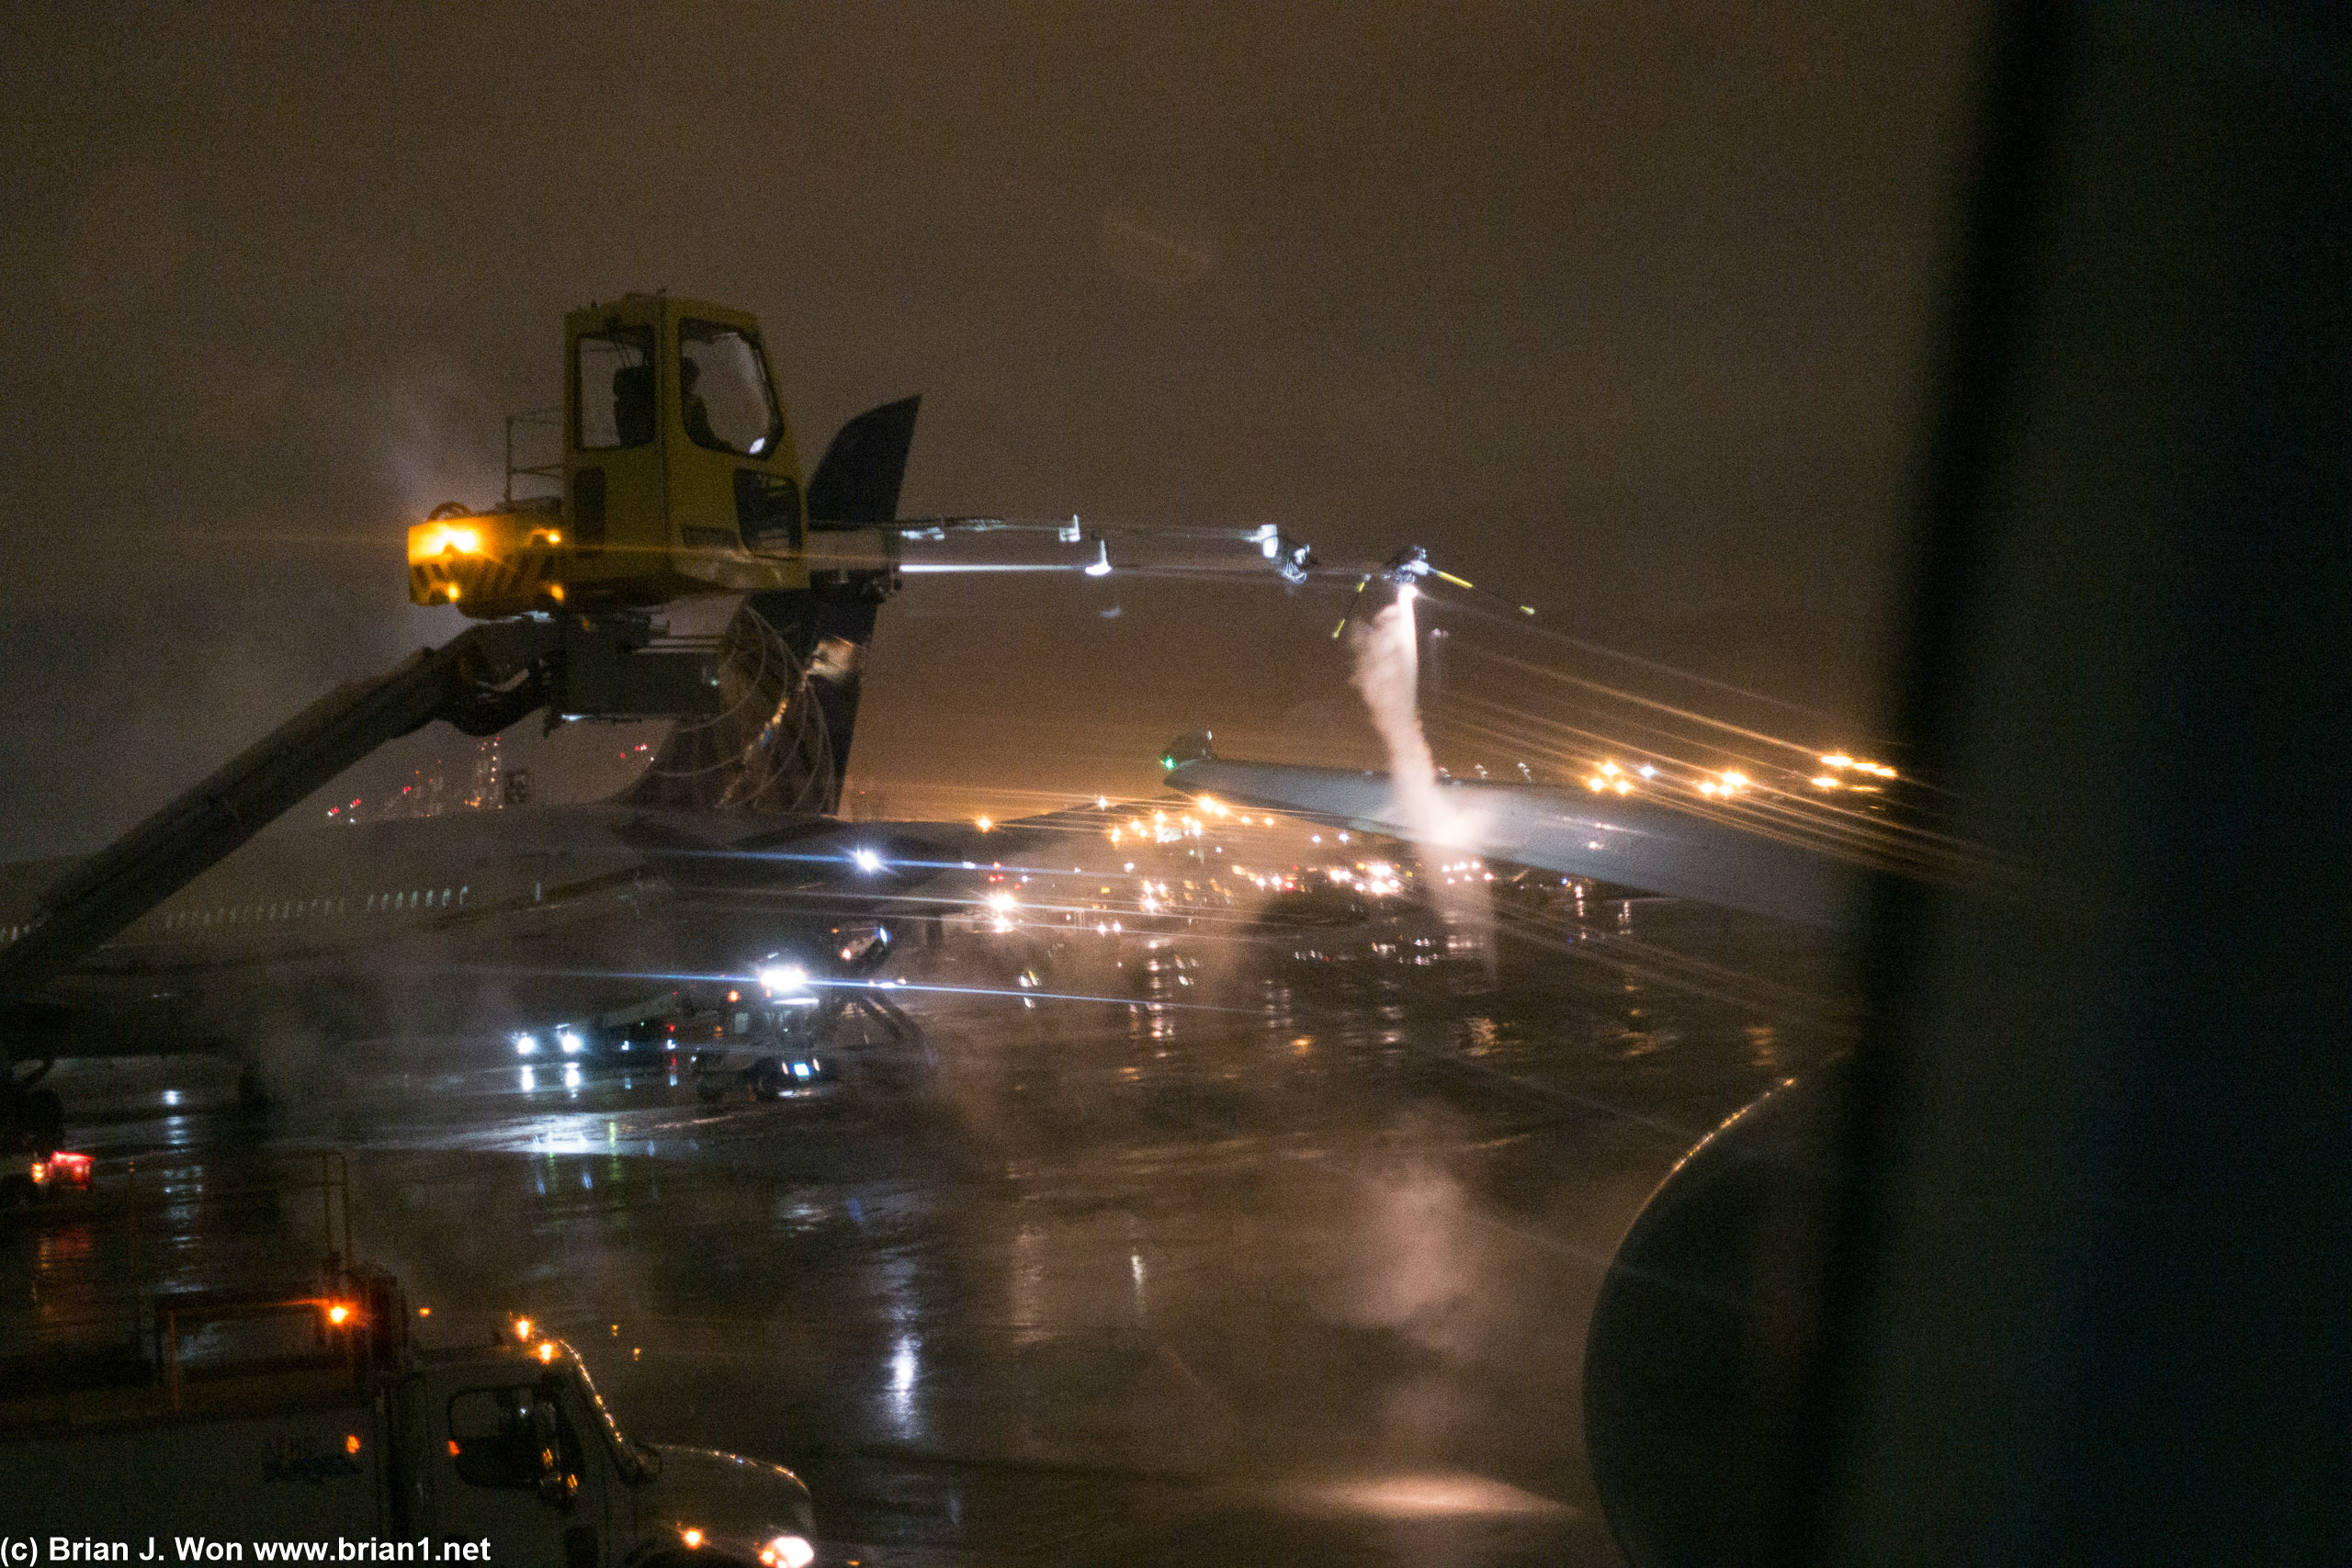 And now over in the de-icing bay.